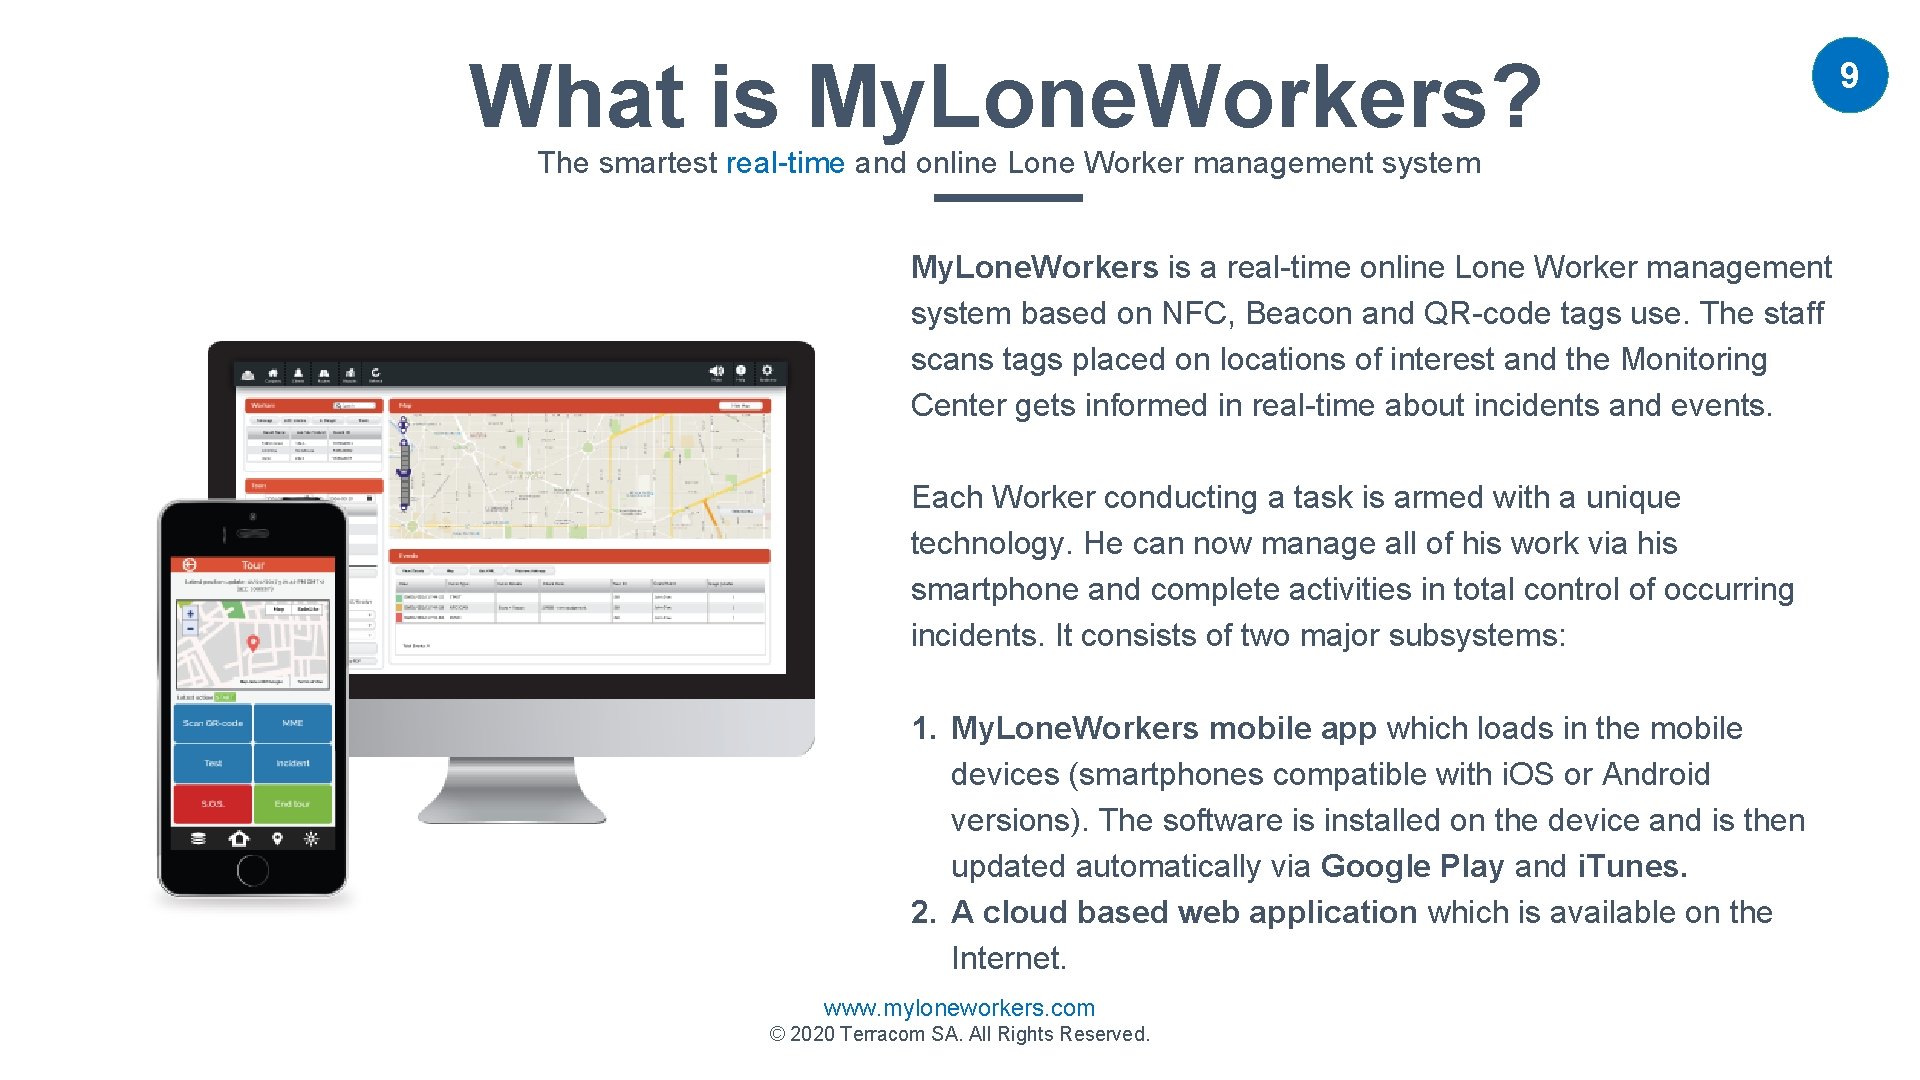 What is My. Lone. Workers? 9 The smartest real-time and online Lone Worker management